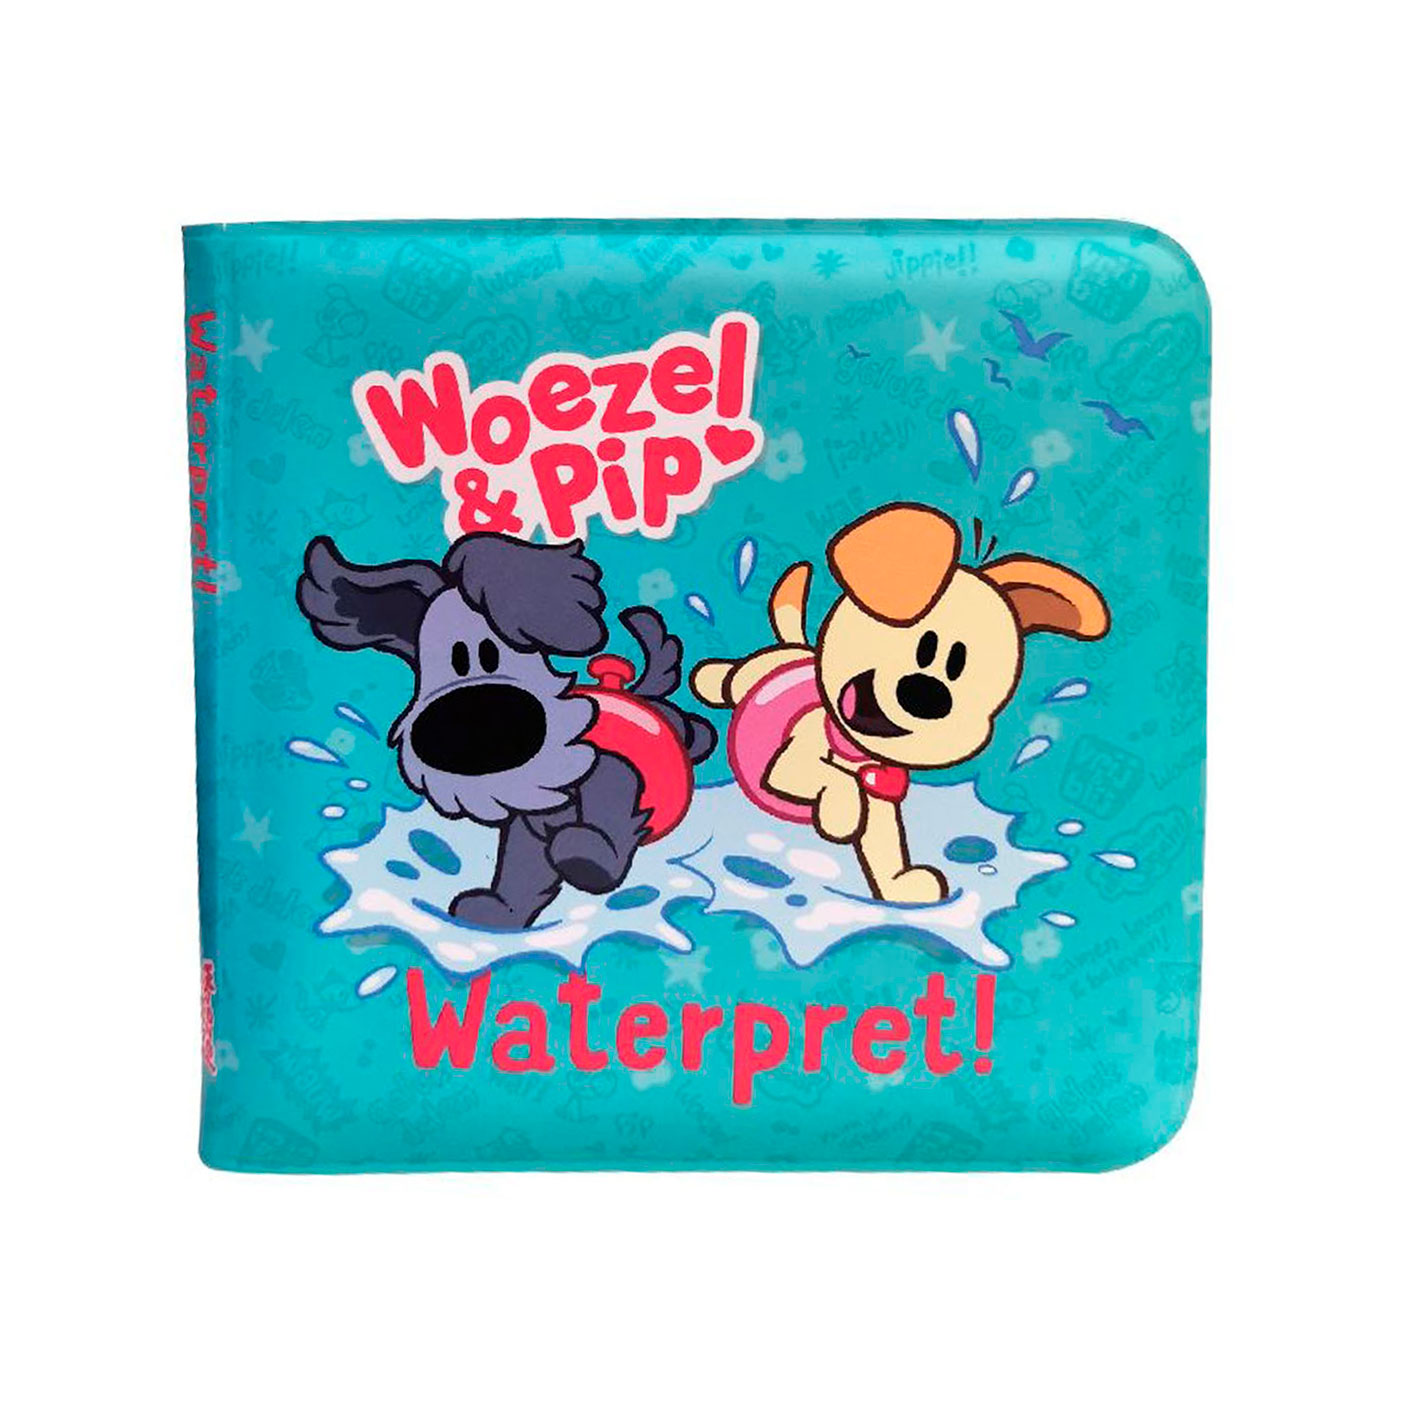 influenza maart Gepensioneerde Woezel and Pip Bath book | Thimble Toys